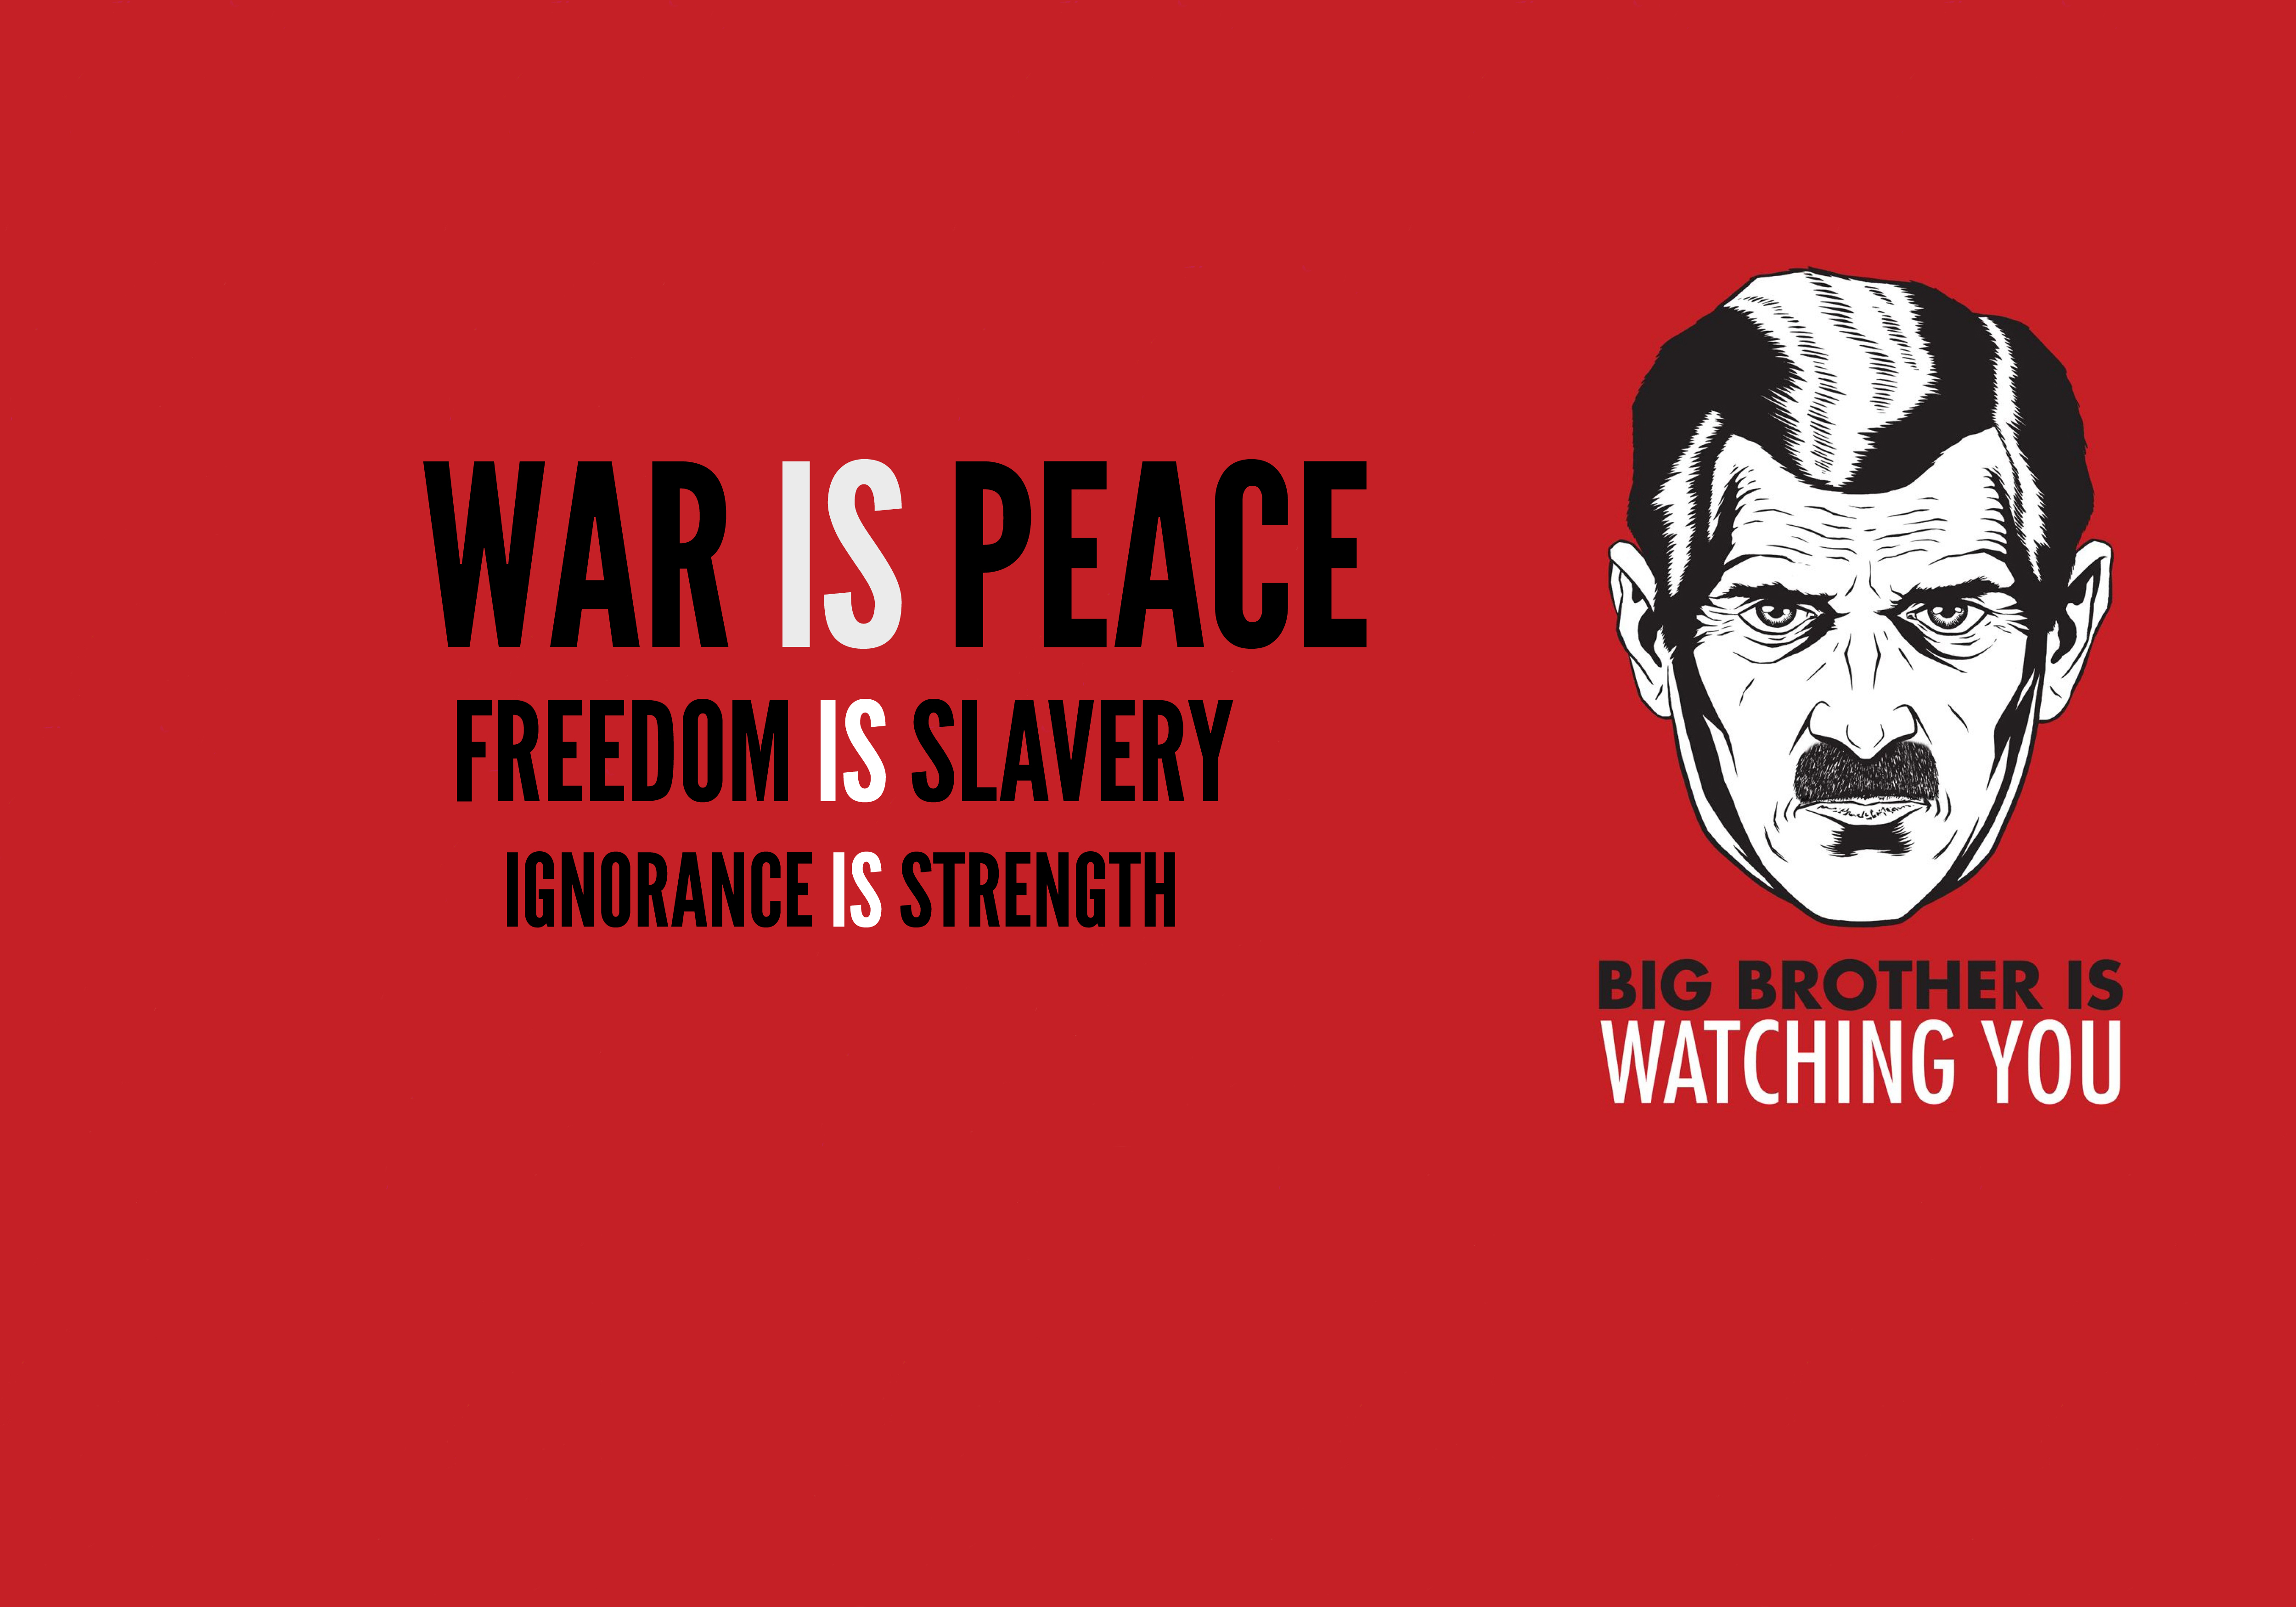 Download wallpaper big brother, big brother, in 1984, orwell, war